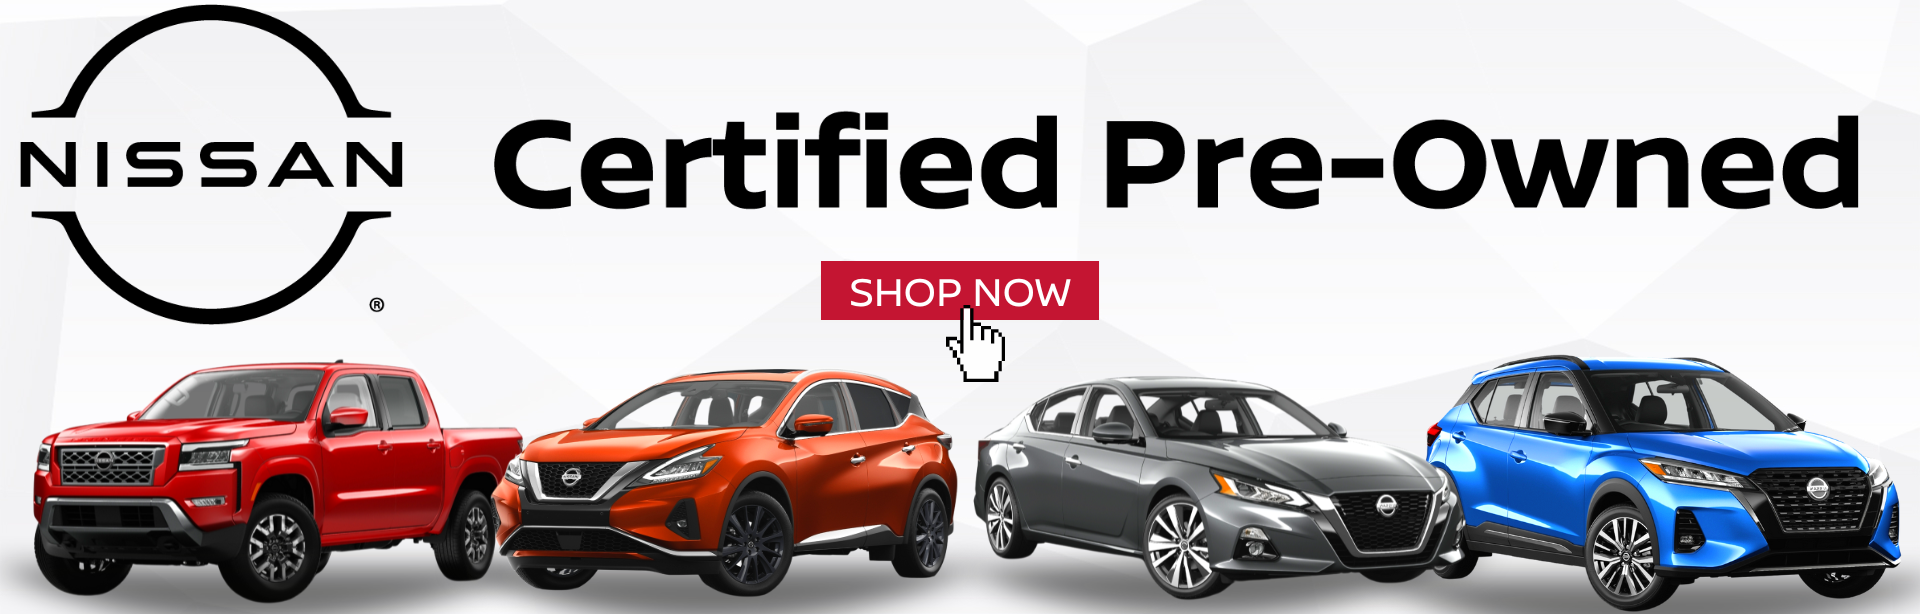 Nissan Certified Pre-Owned vehicles